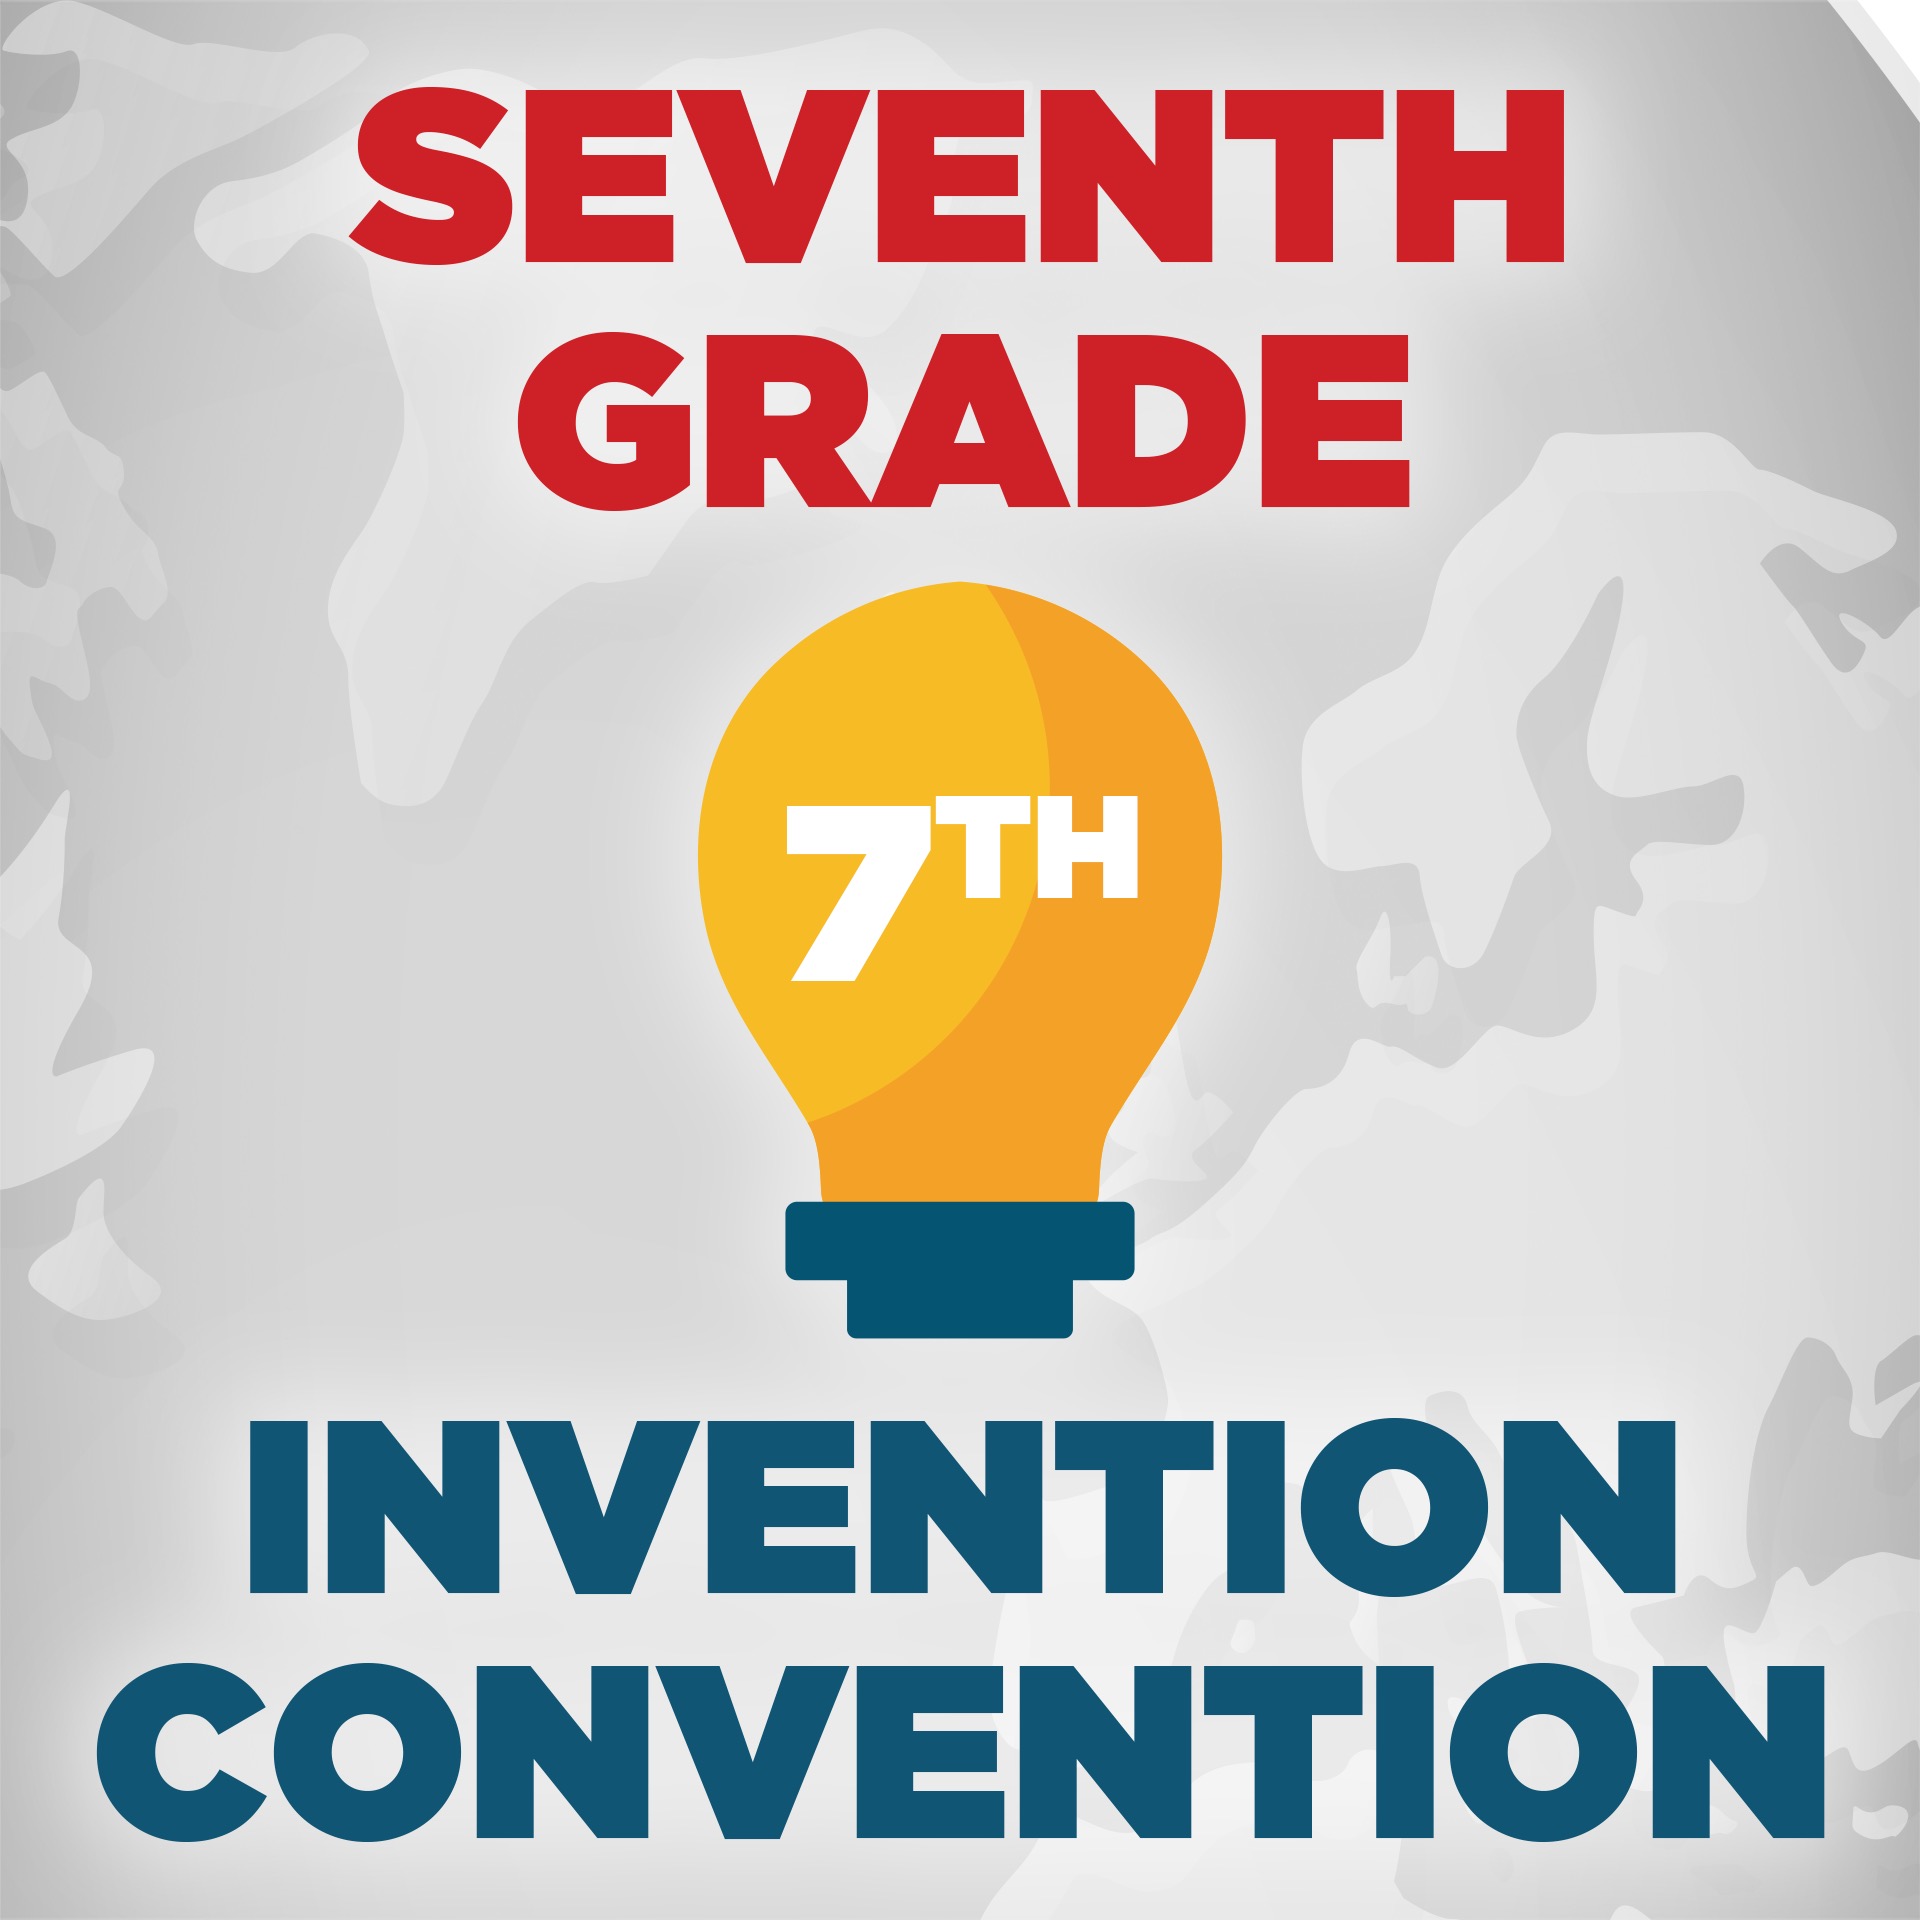 7th Invention Convention